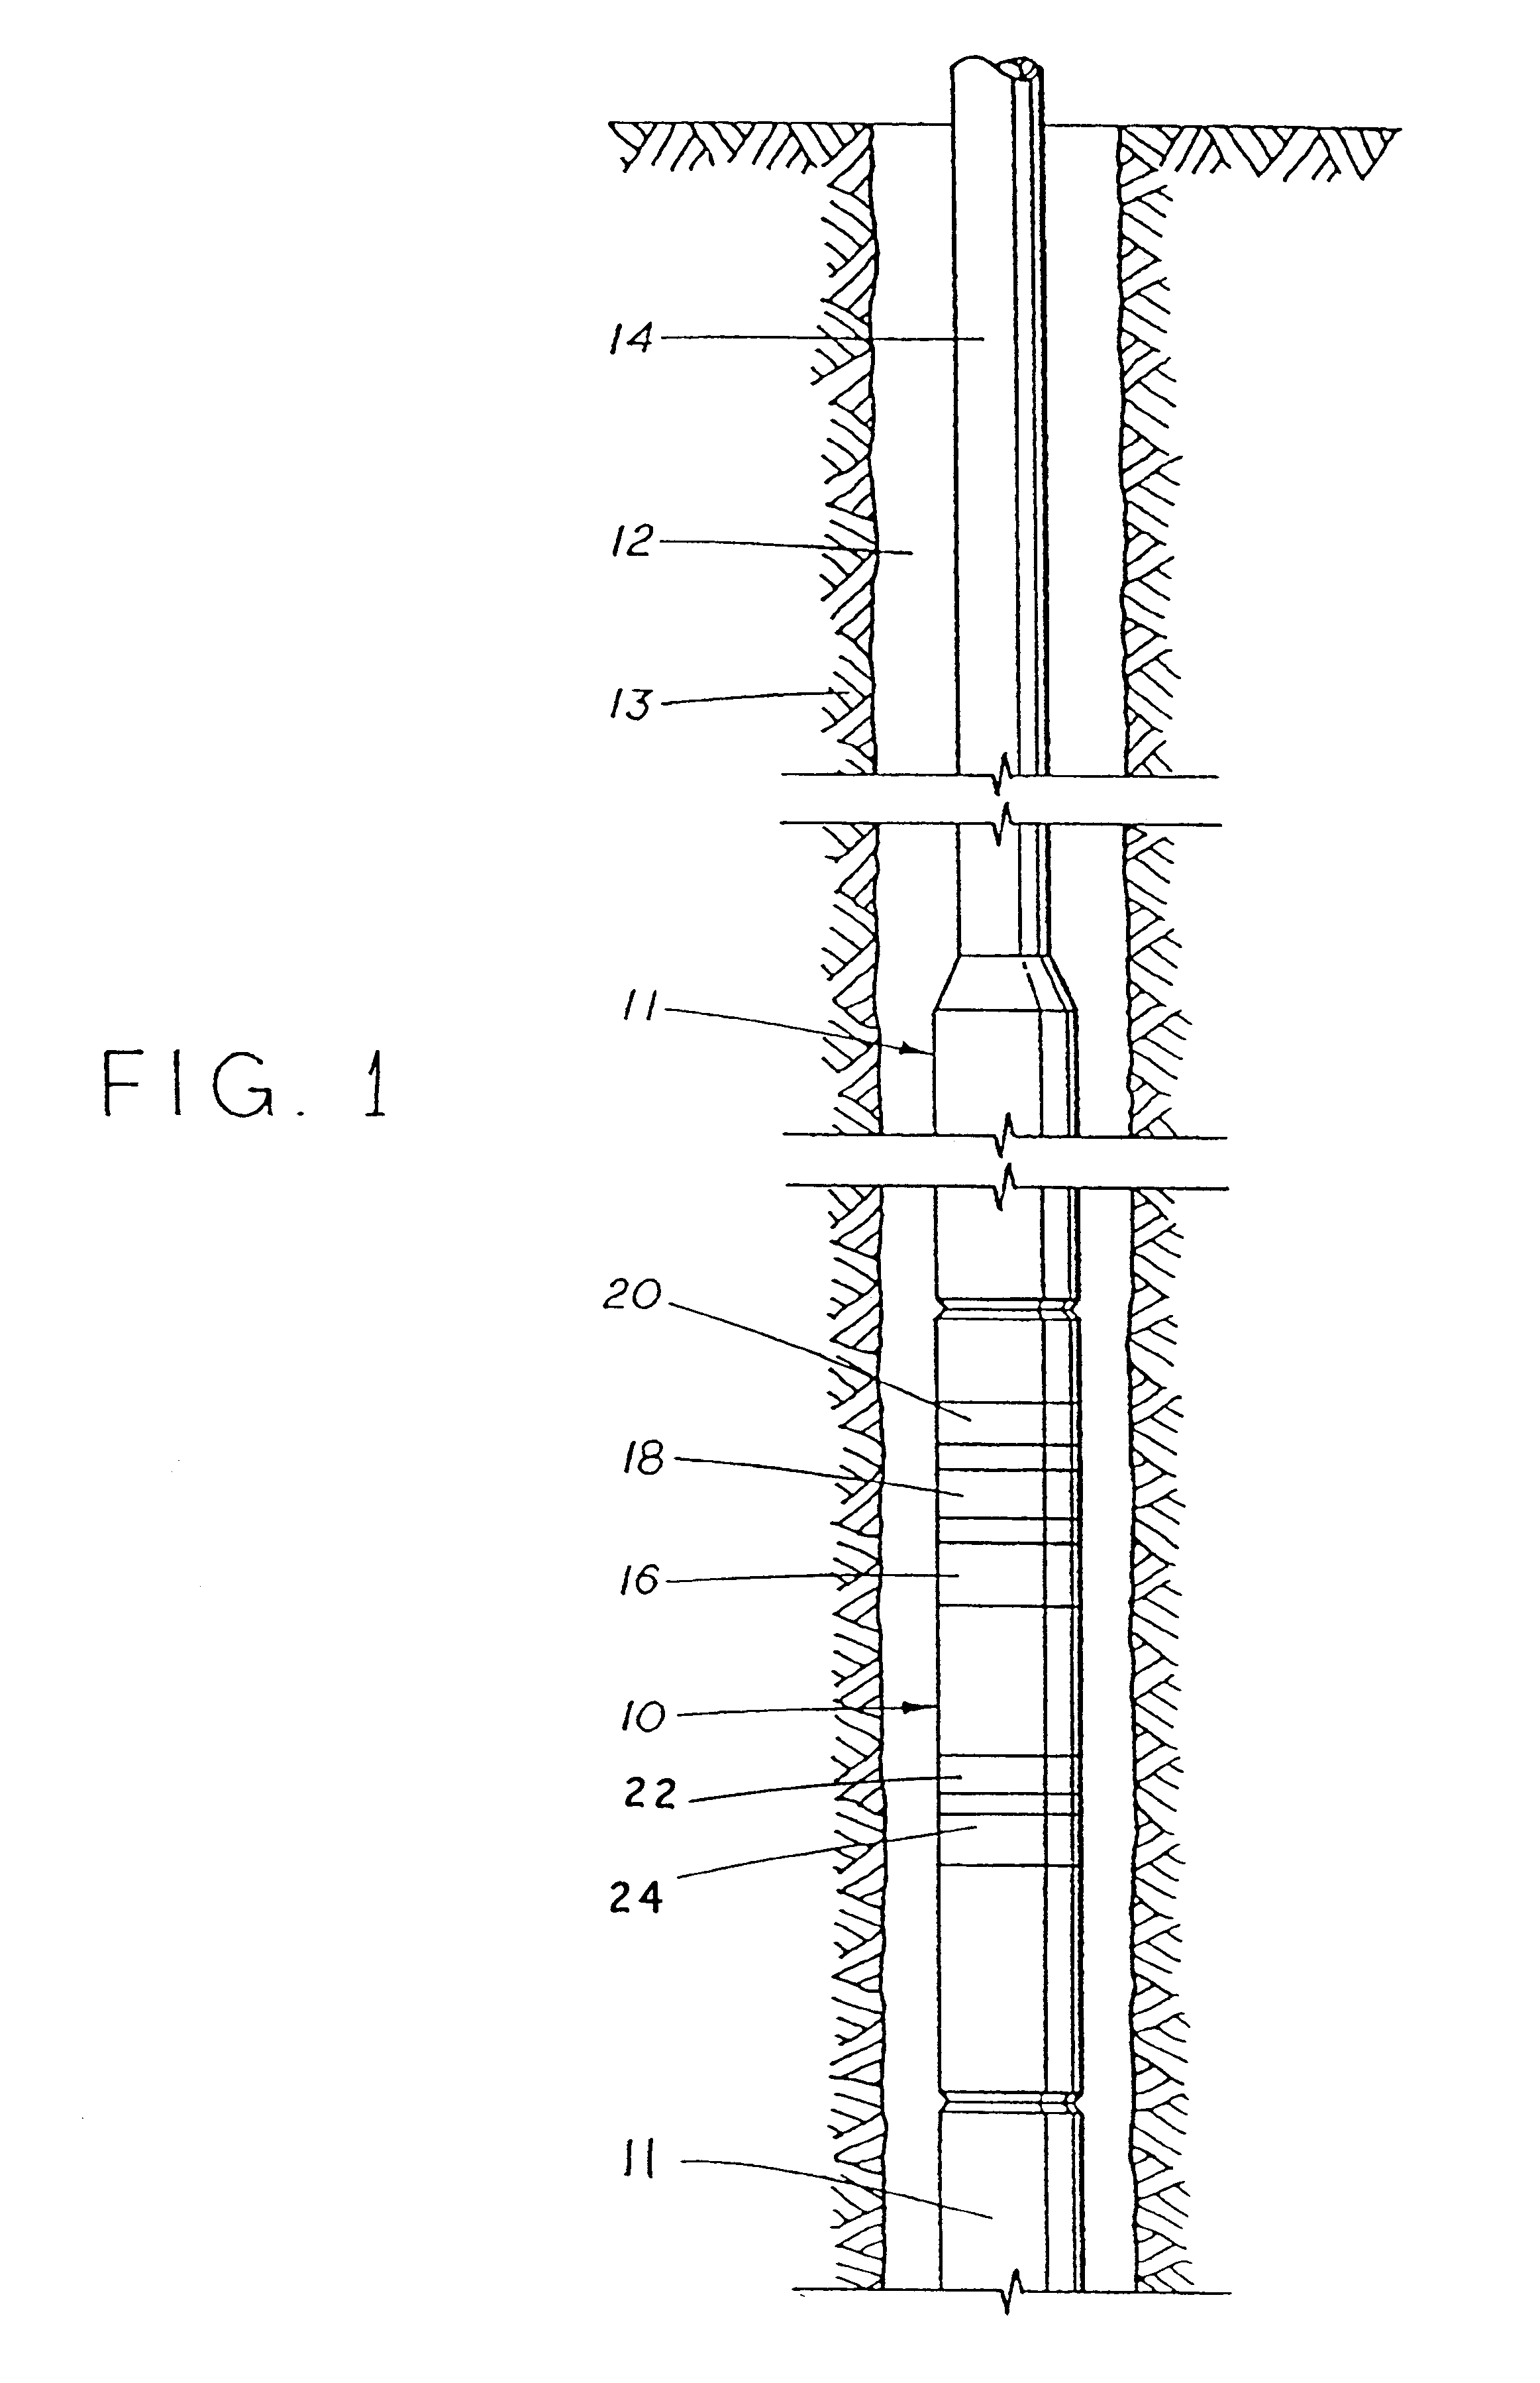 Electromagnetic wave resistivity tool having a tilted antenna for geosteering within a desired payzone